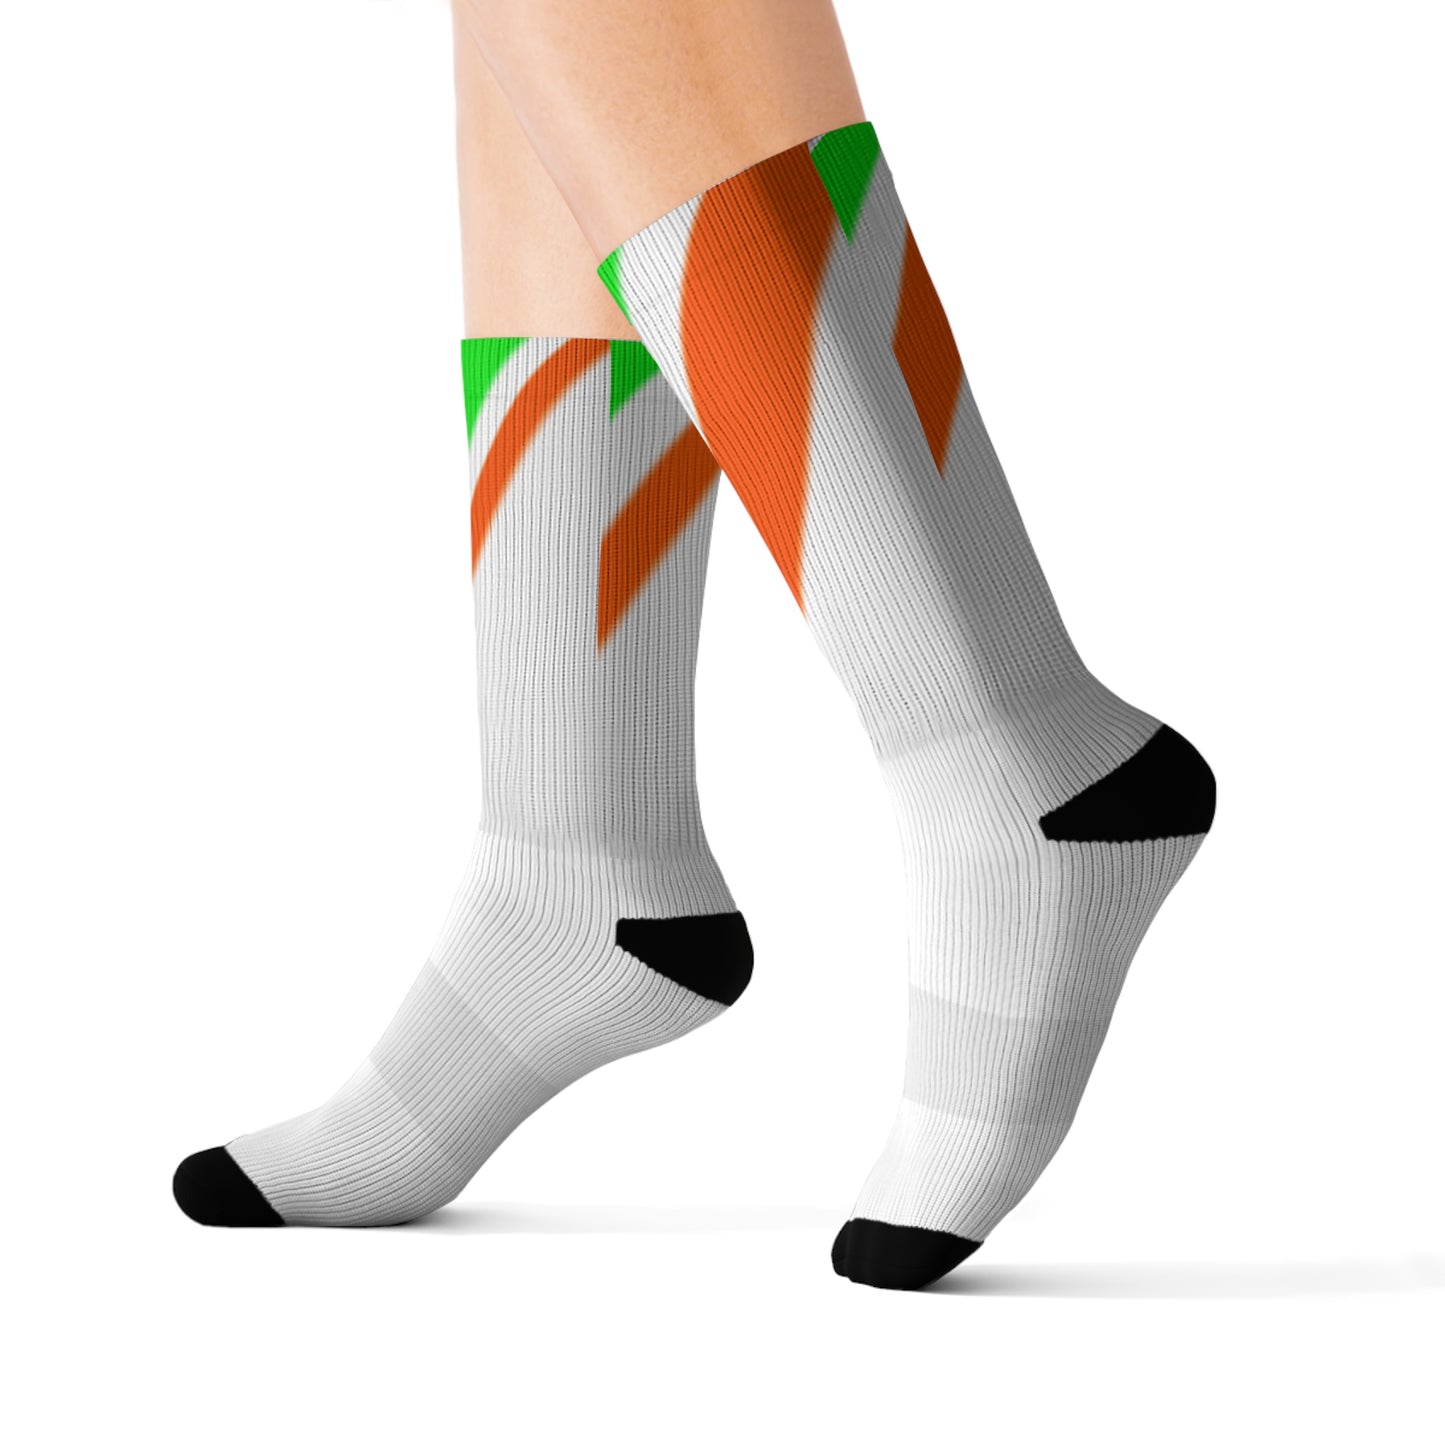 A.............rainbow (representing the Covenant) GGG design Sublimation Socks